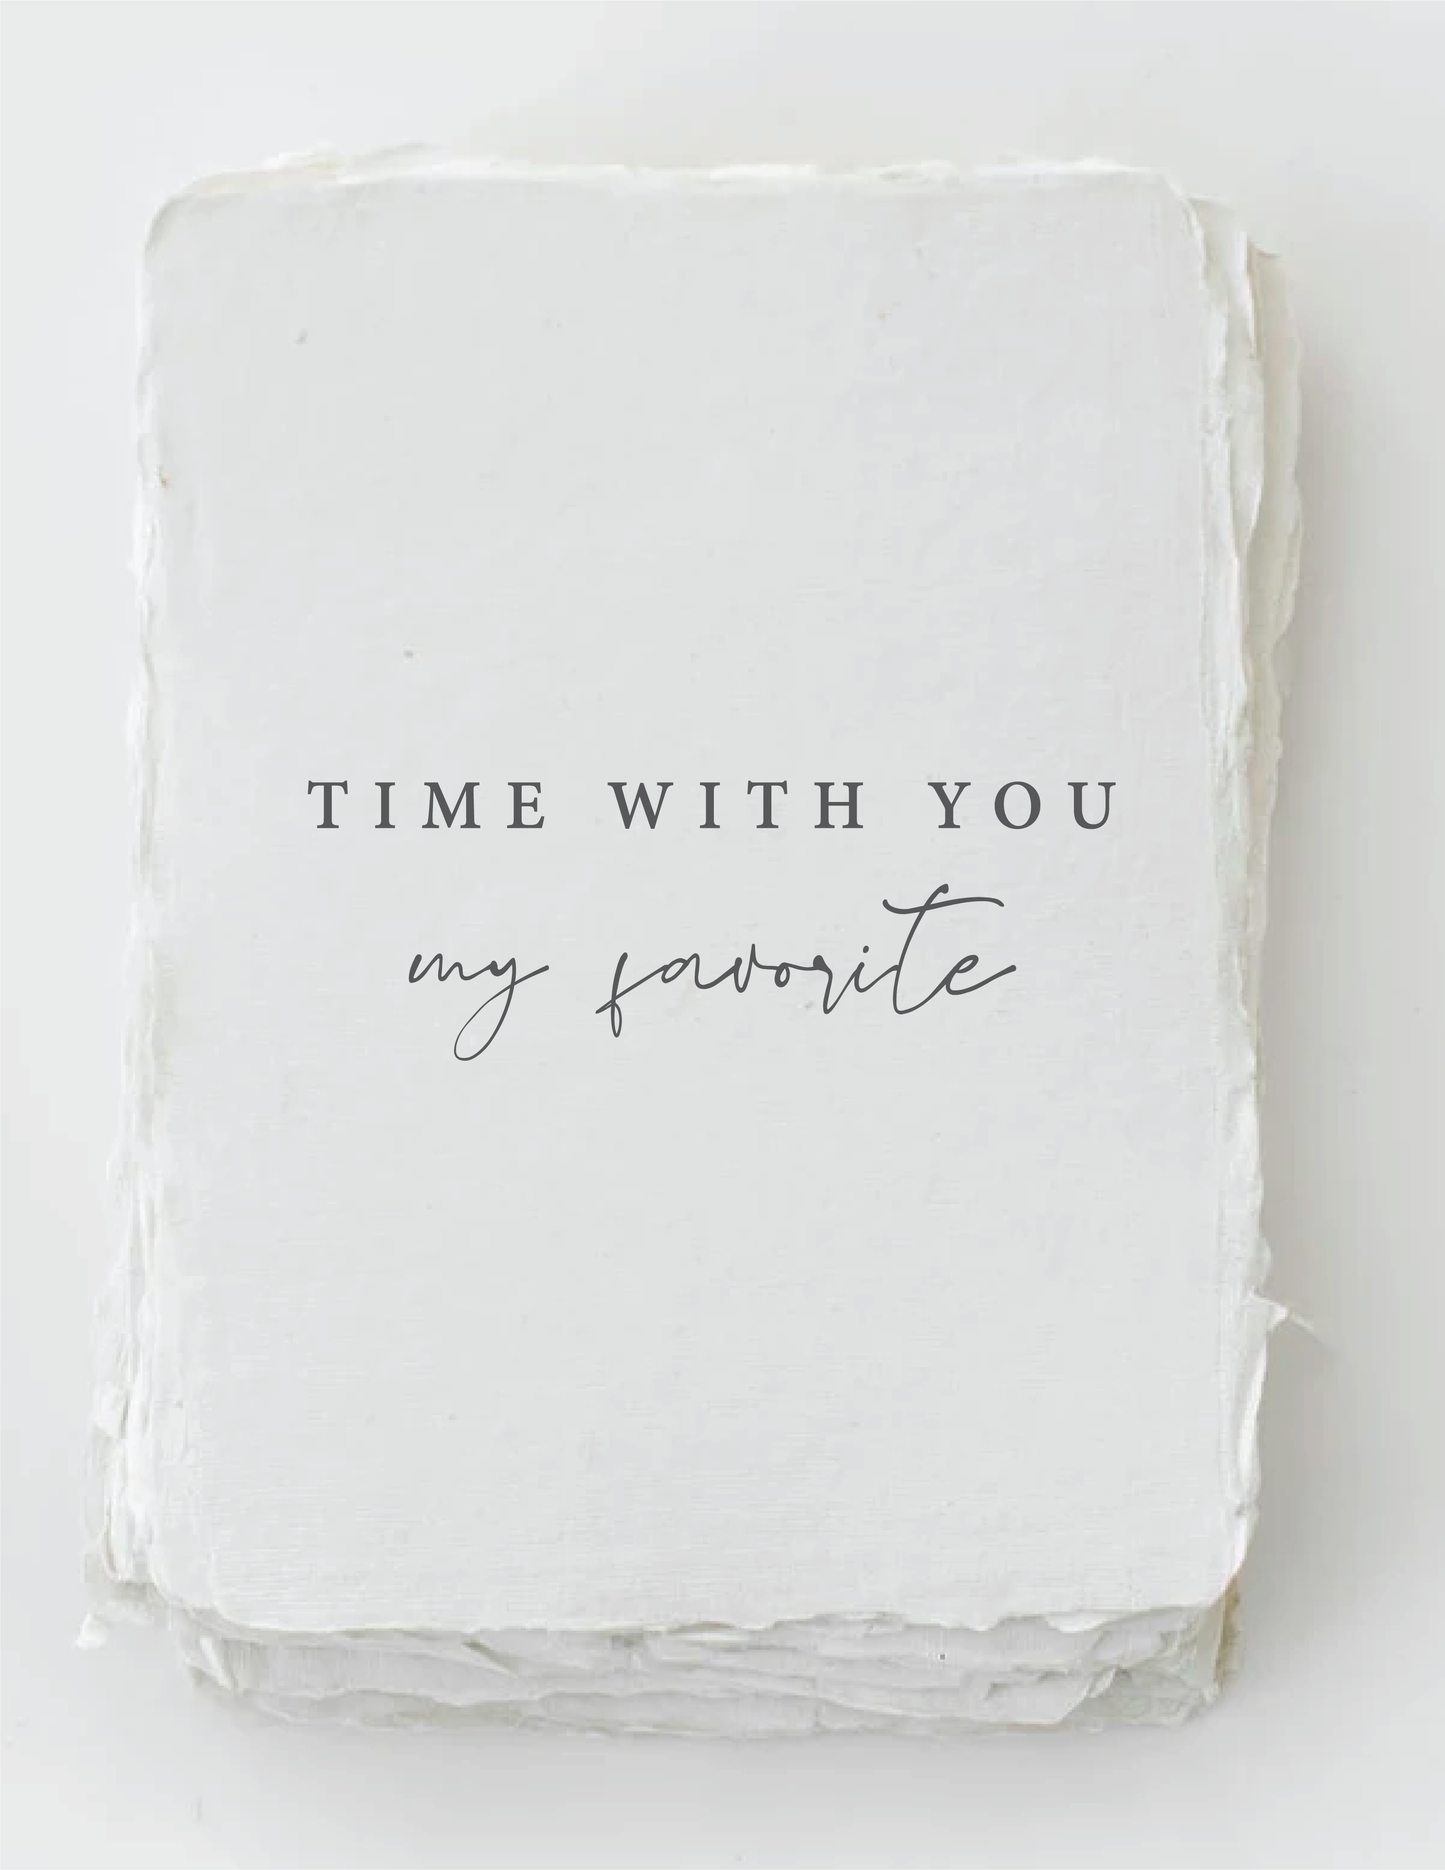 "Time with you is my favorite." Love Friend Greeting Card